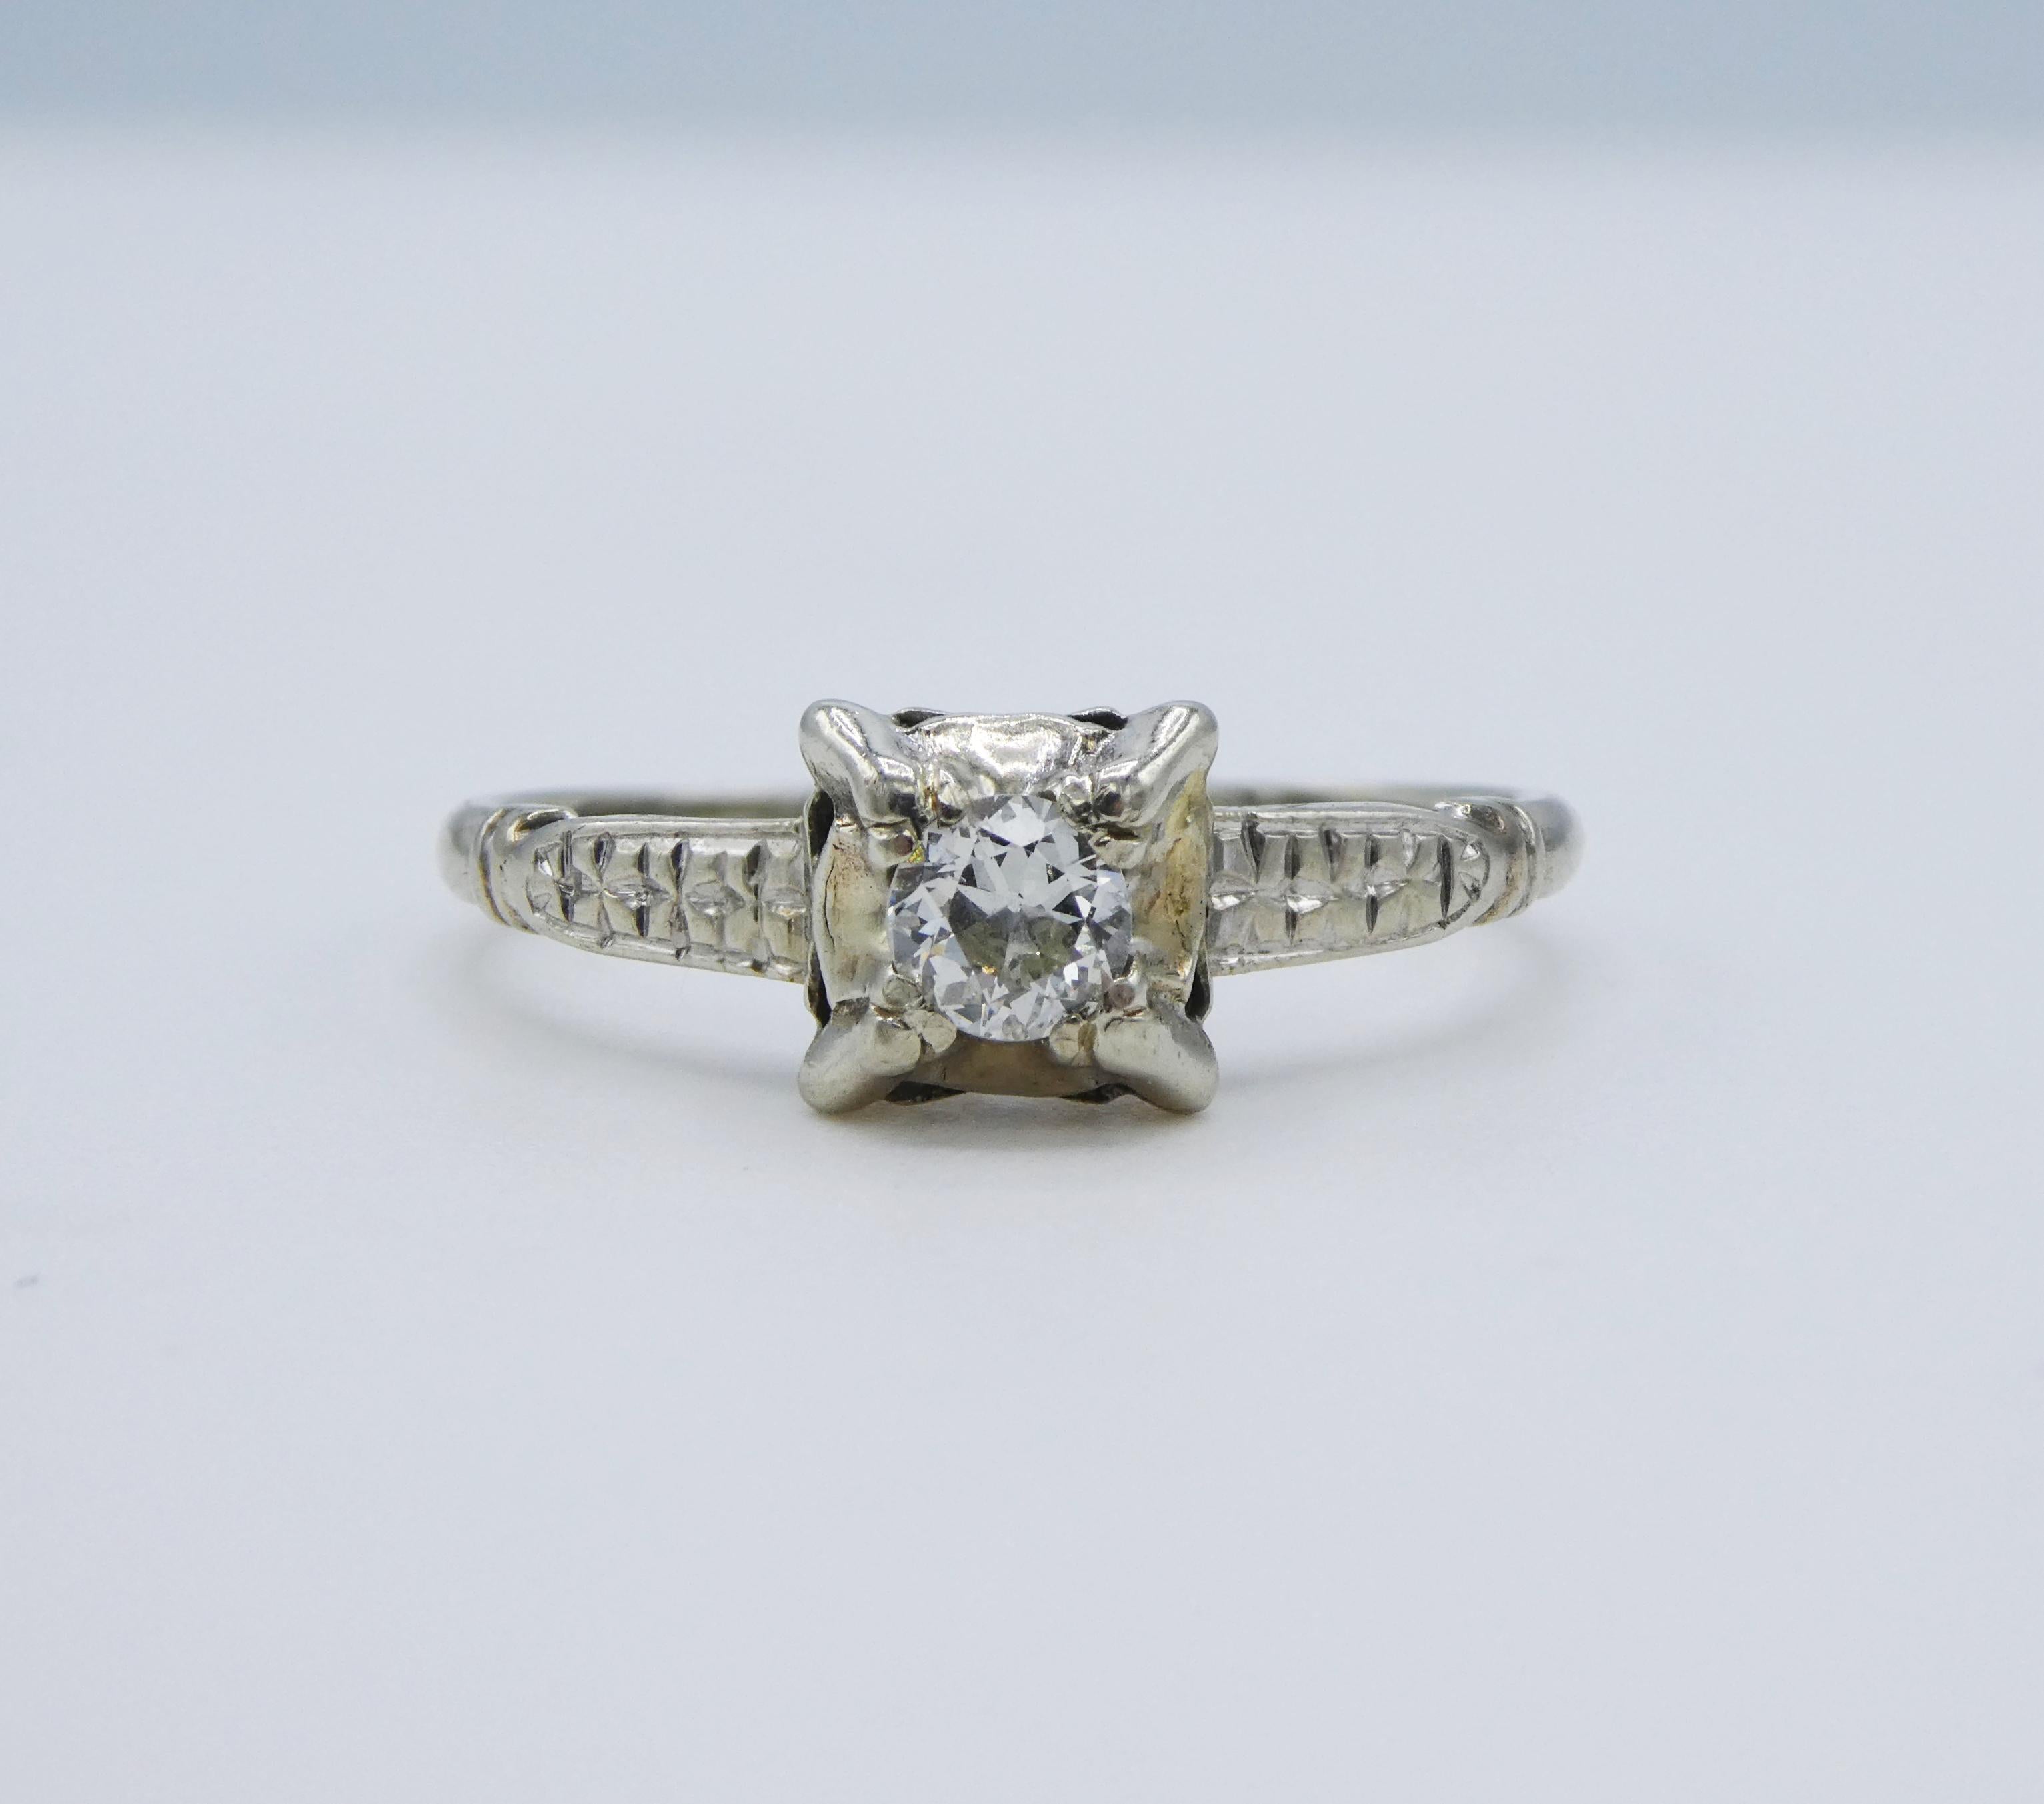 Antique Mine Cut Diamond 14K White Gold Estate Engagement Ring Size 7
Metal: 14k White 
Center Stone: approx. 0.25ct Mine Cut Diamonds color I-J clarity SI1
Weight: 1.40 grams
Finger Size: 7
Markings: Stamped 